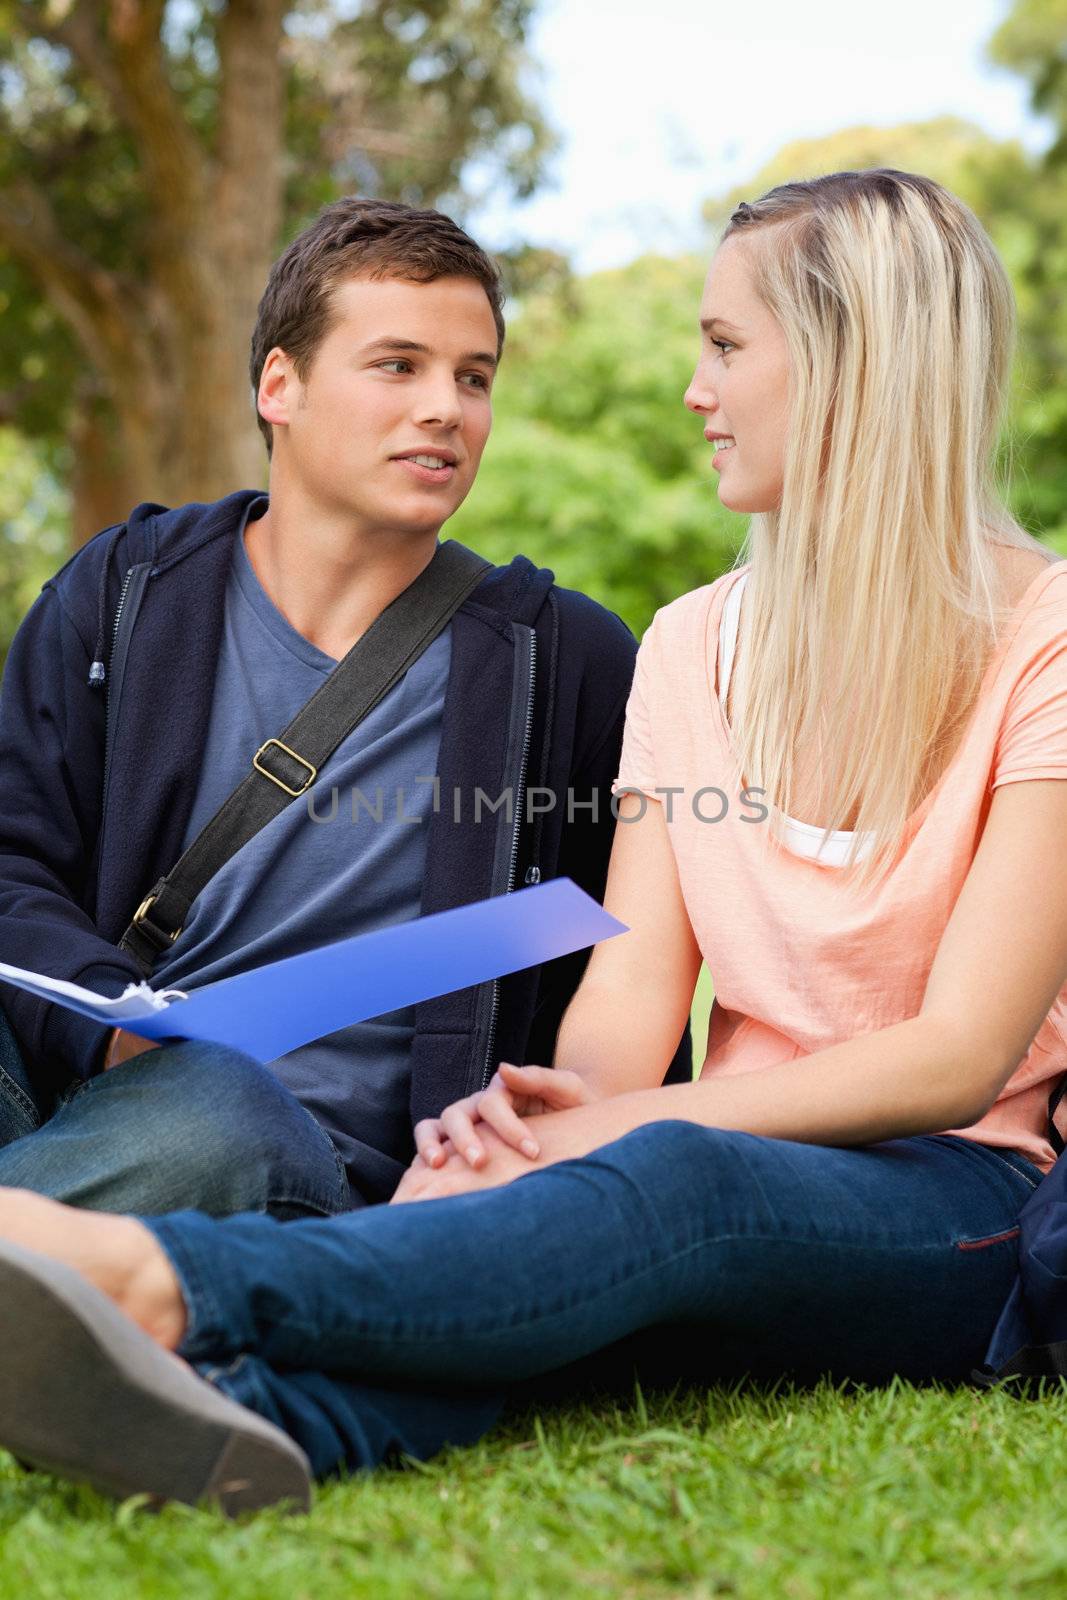 Students revising together by Wavebreakmedia